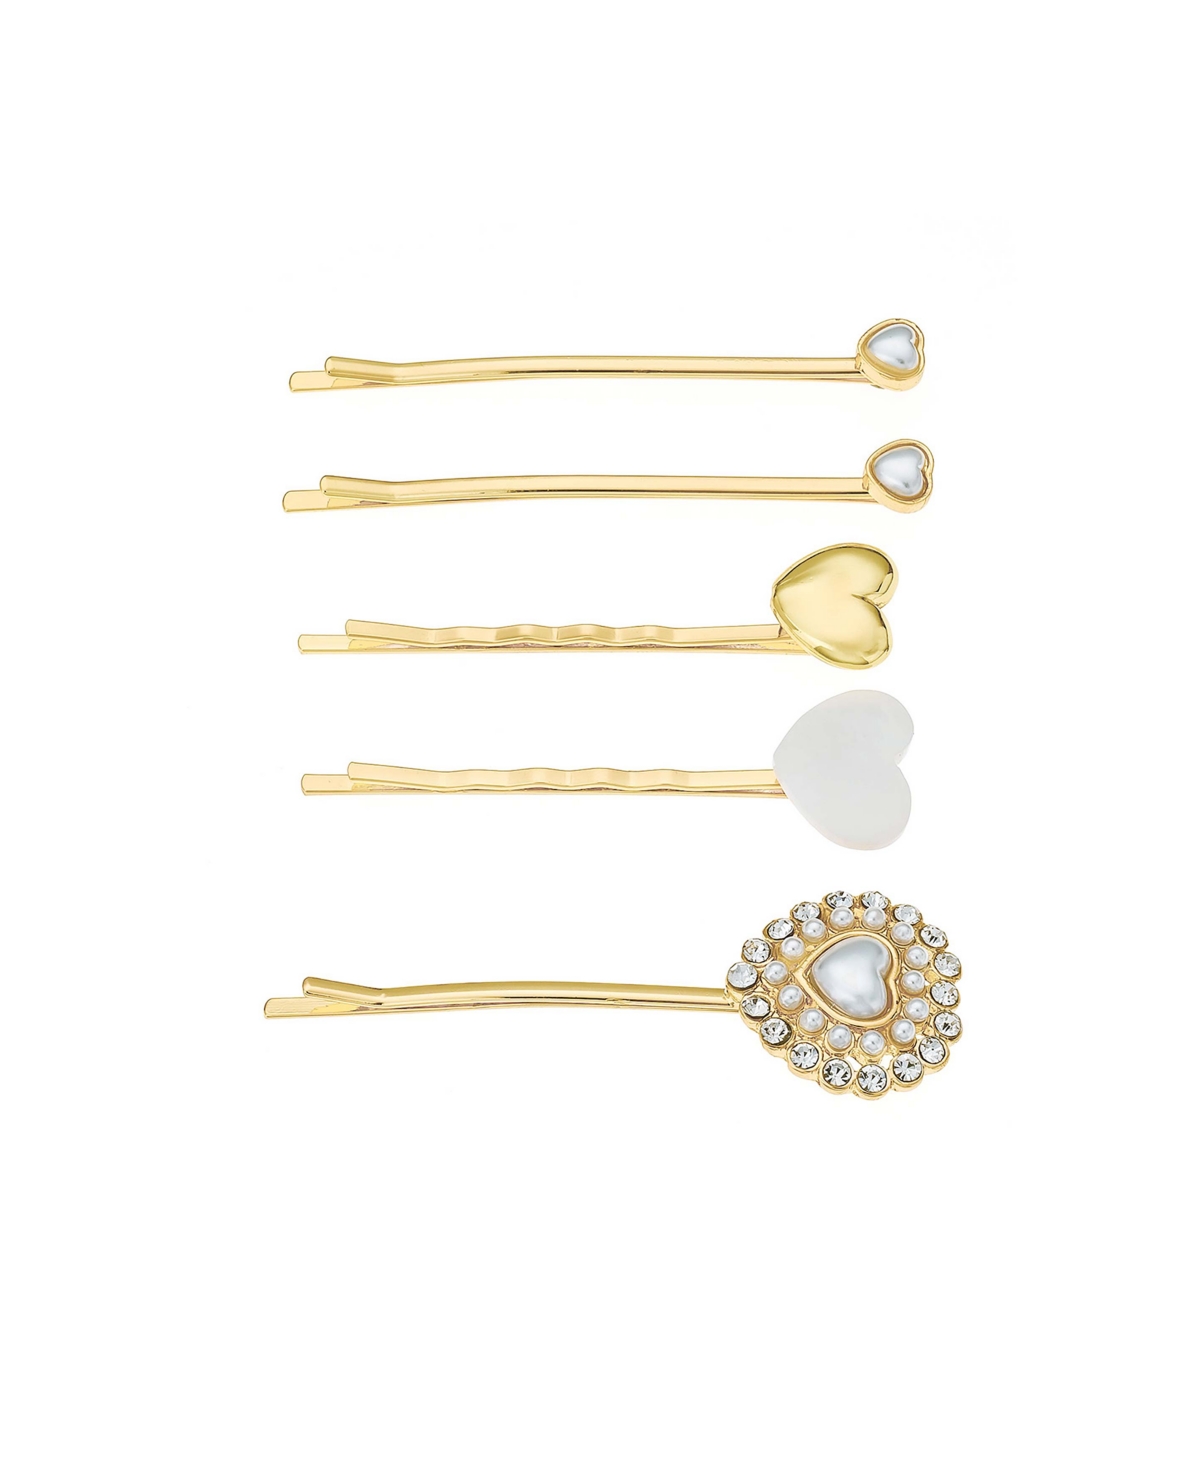 Lonely Hearts Club Hair Pin Set - Gold